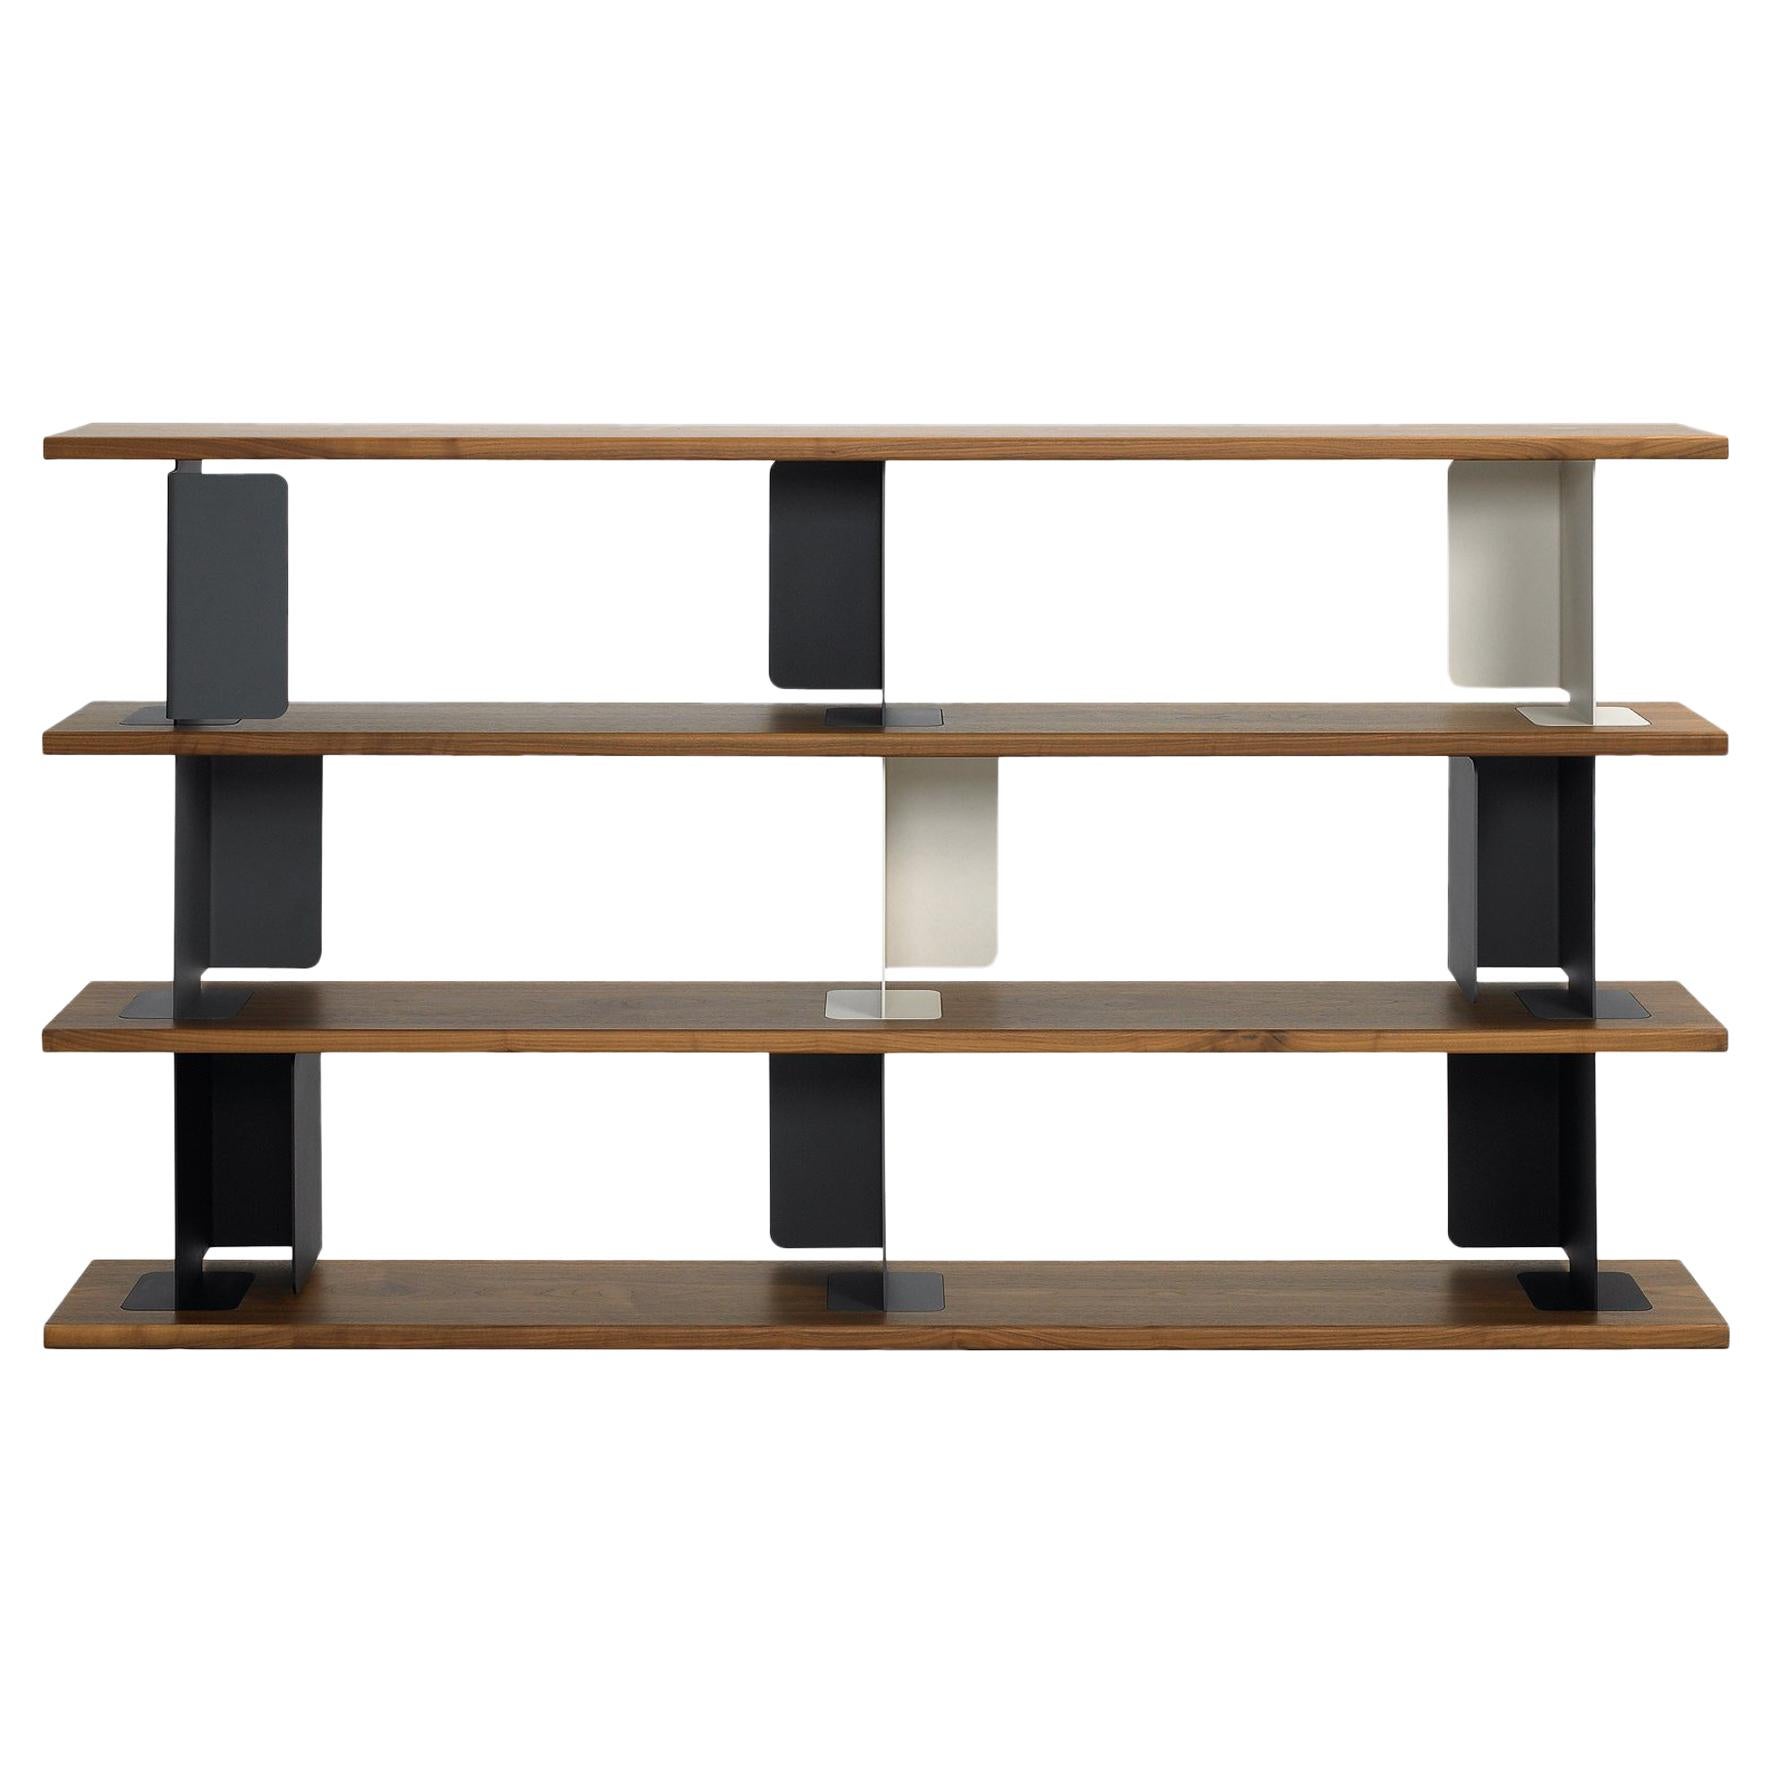 ClassiCon Paris 4 Shelves in Walnut by E. Barber & J. Osgerby For Sale